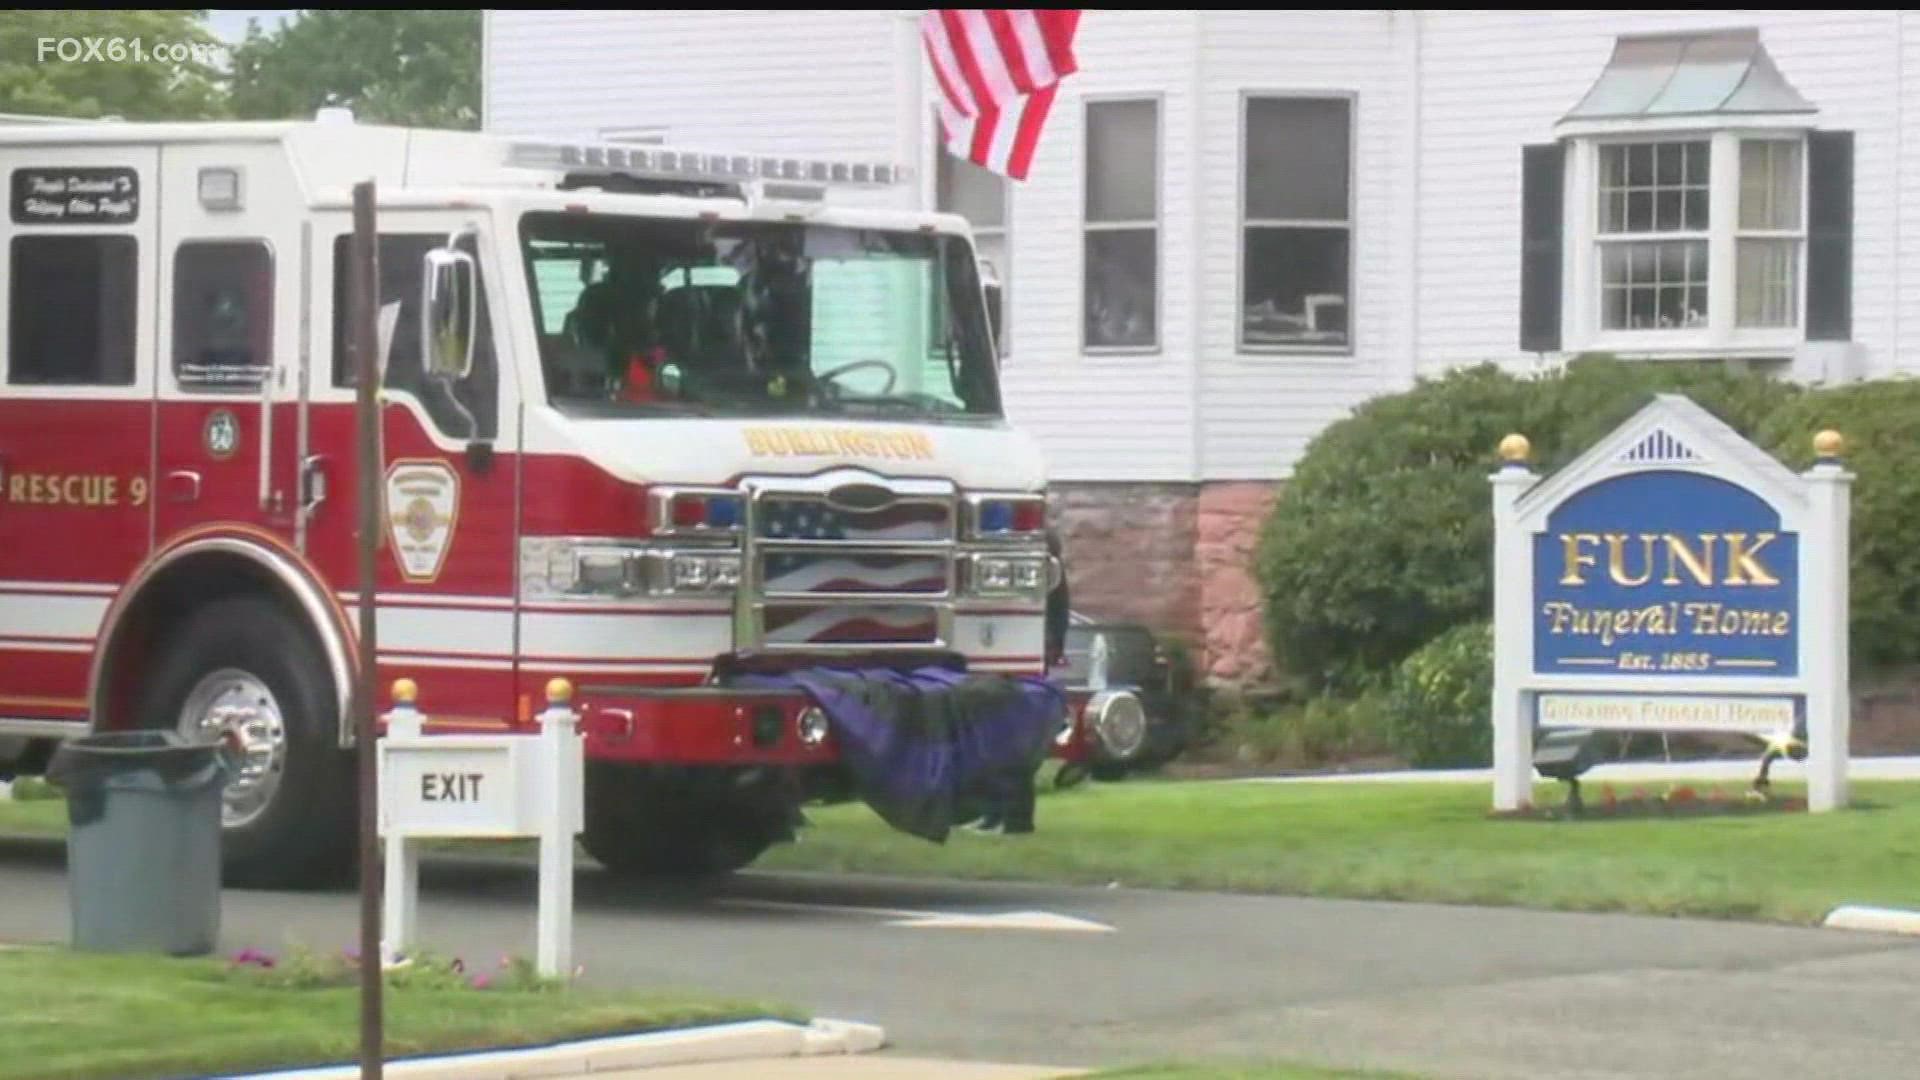 Colin McFadden became ill at a fire in New Hartford last week and later died.